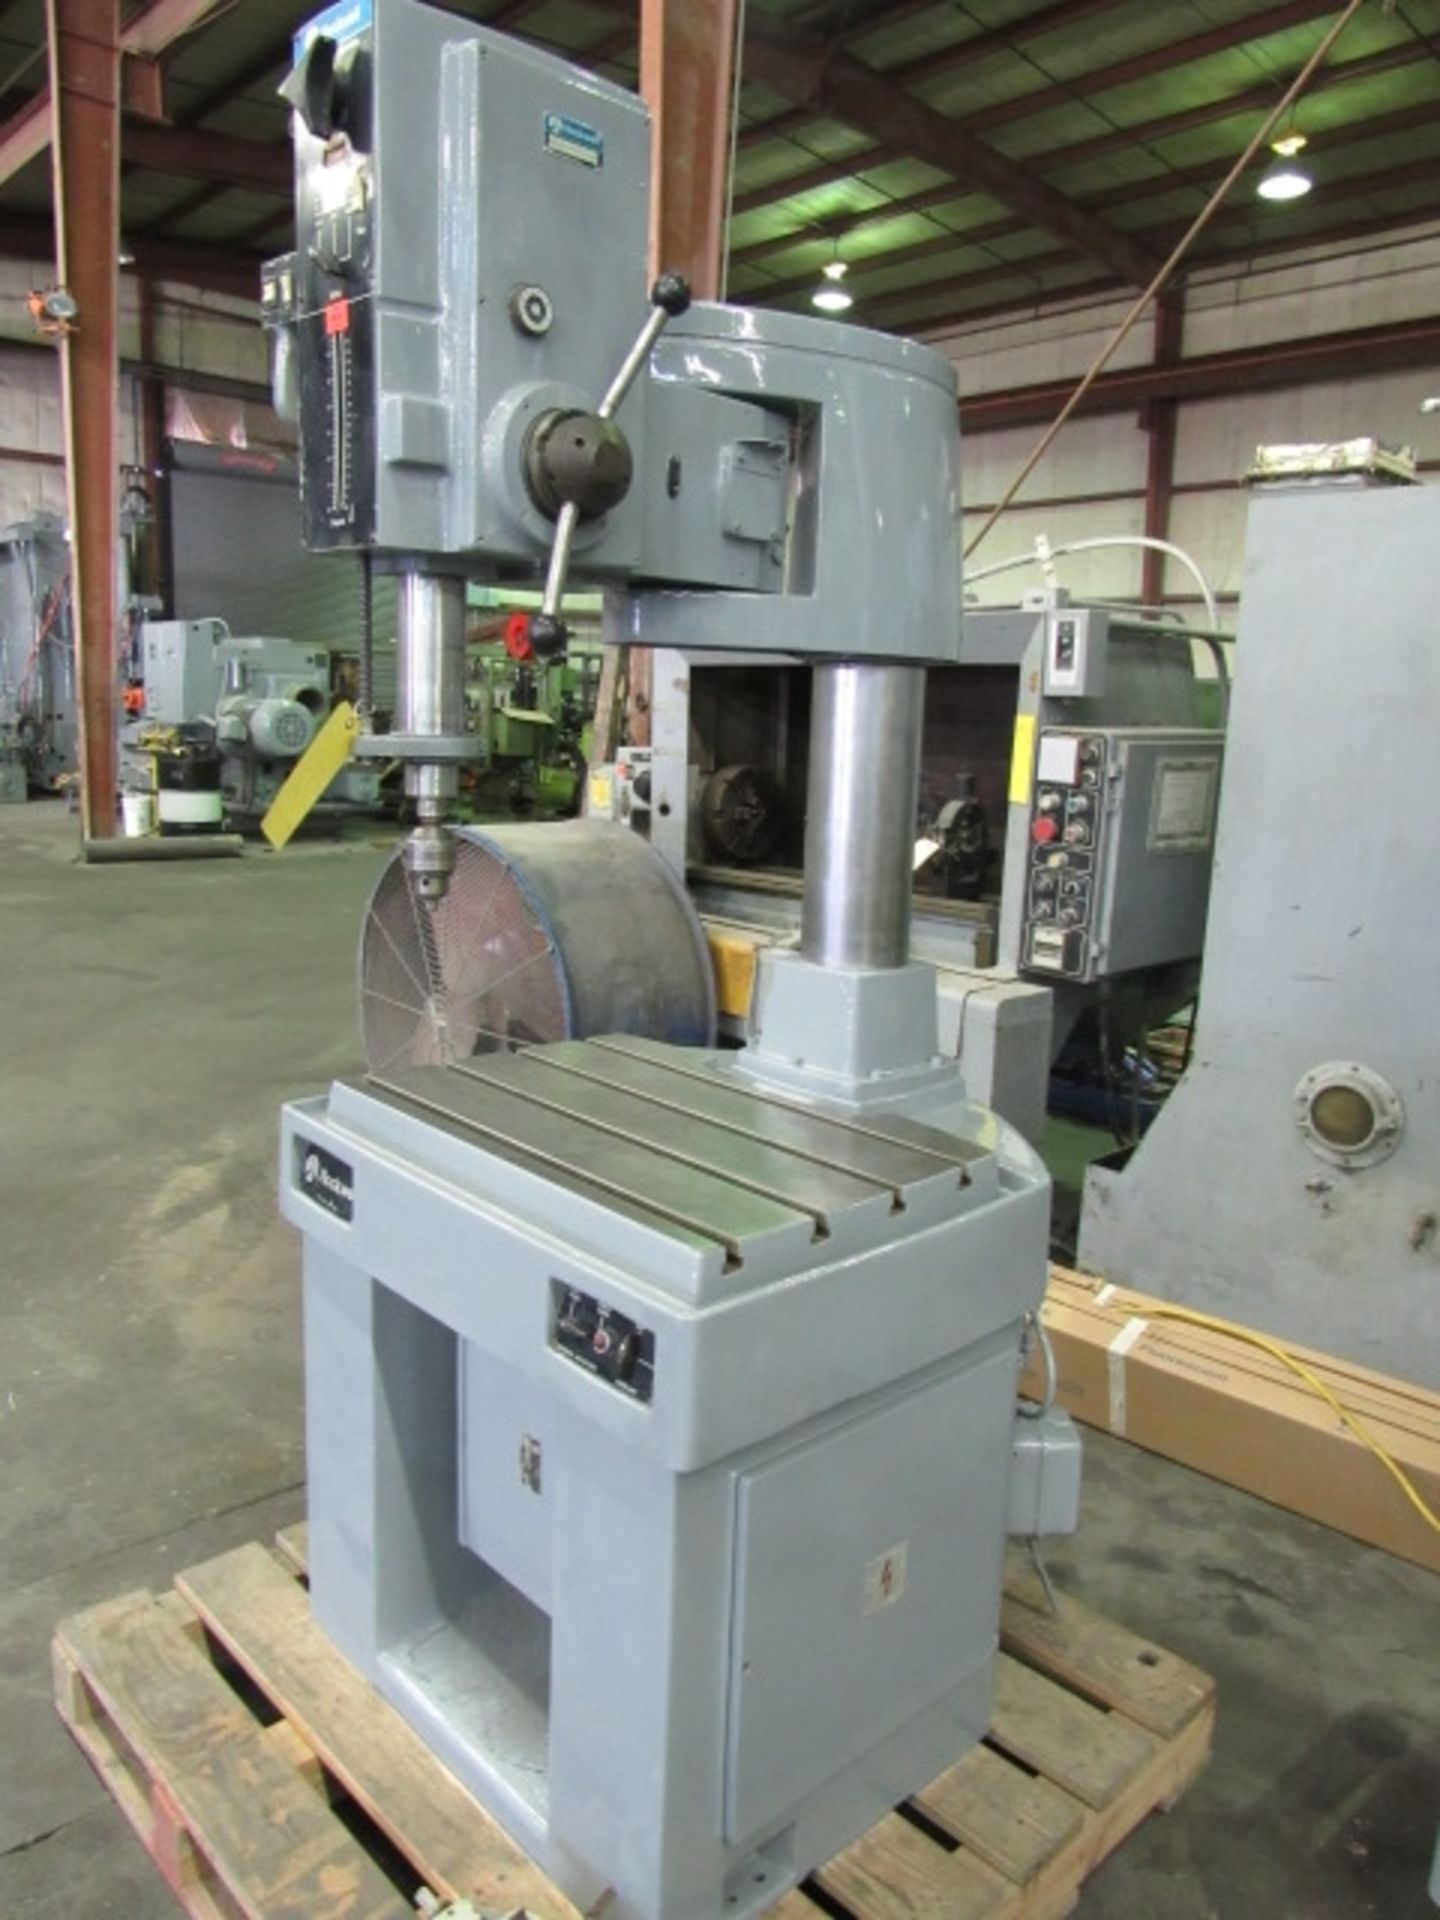 TABLE TYPE JACK KNIFE DRILL, ROCKWELL MDL. EFI-3T, 30” x 20” table, 3 MT spdl. taper, (12) spdl. - Image 2 of 5